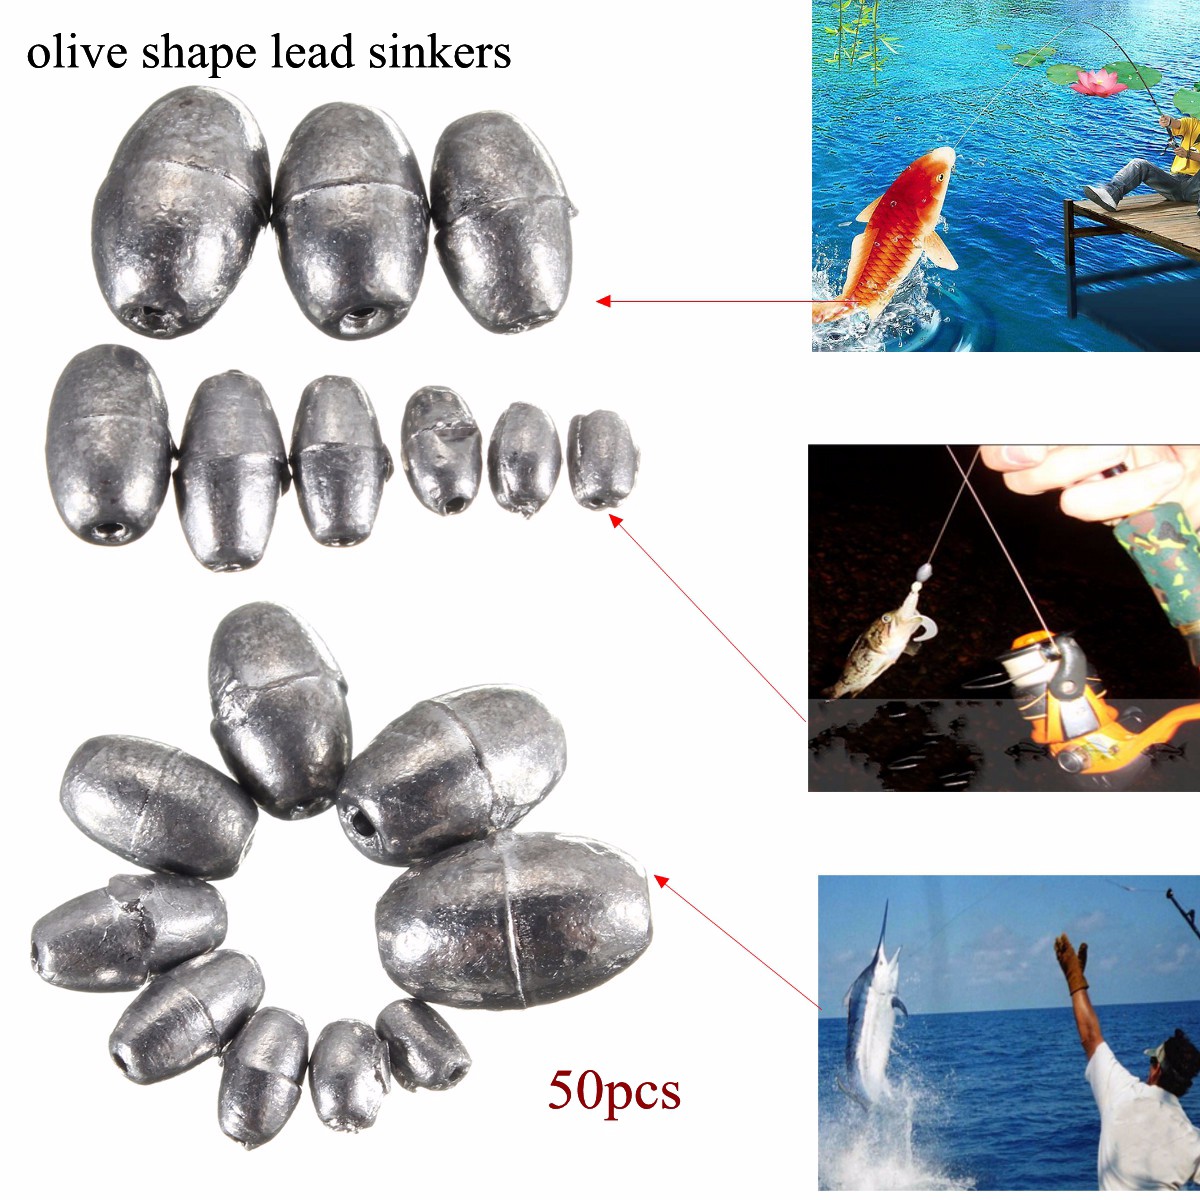 100Pcs Olive-Shaped Weight Lead Sinkers Pure Lead Making Fishing Sinker Tackle 